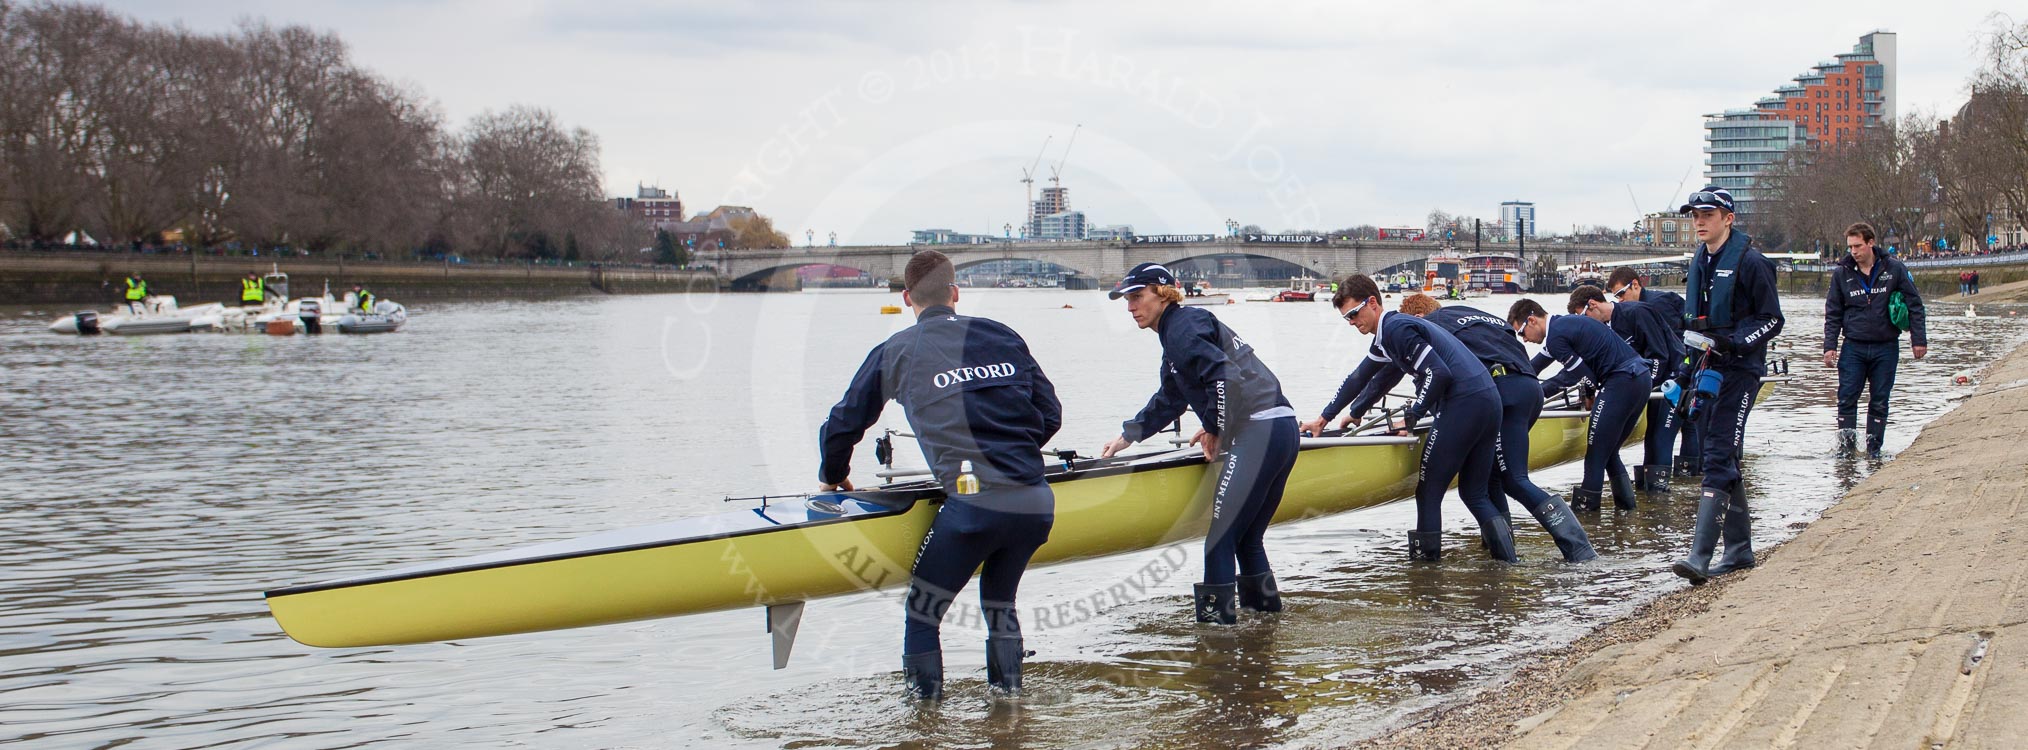 The Boat Race 2013.
Putney,
London SW15,

United Kingdom,
on 31 March 2013 at 15:14, image #113